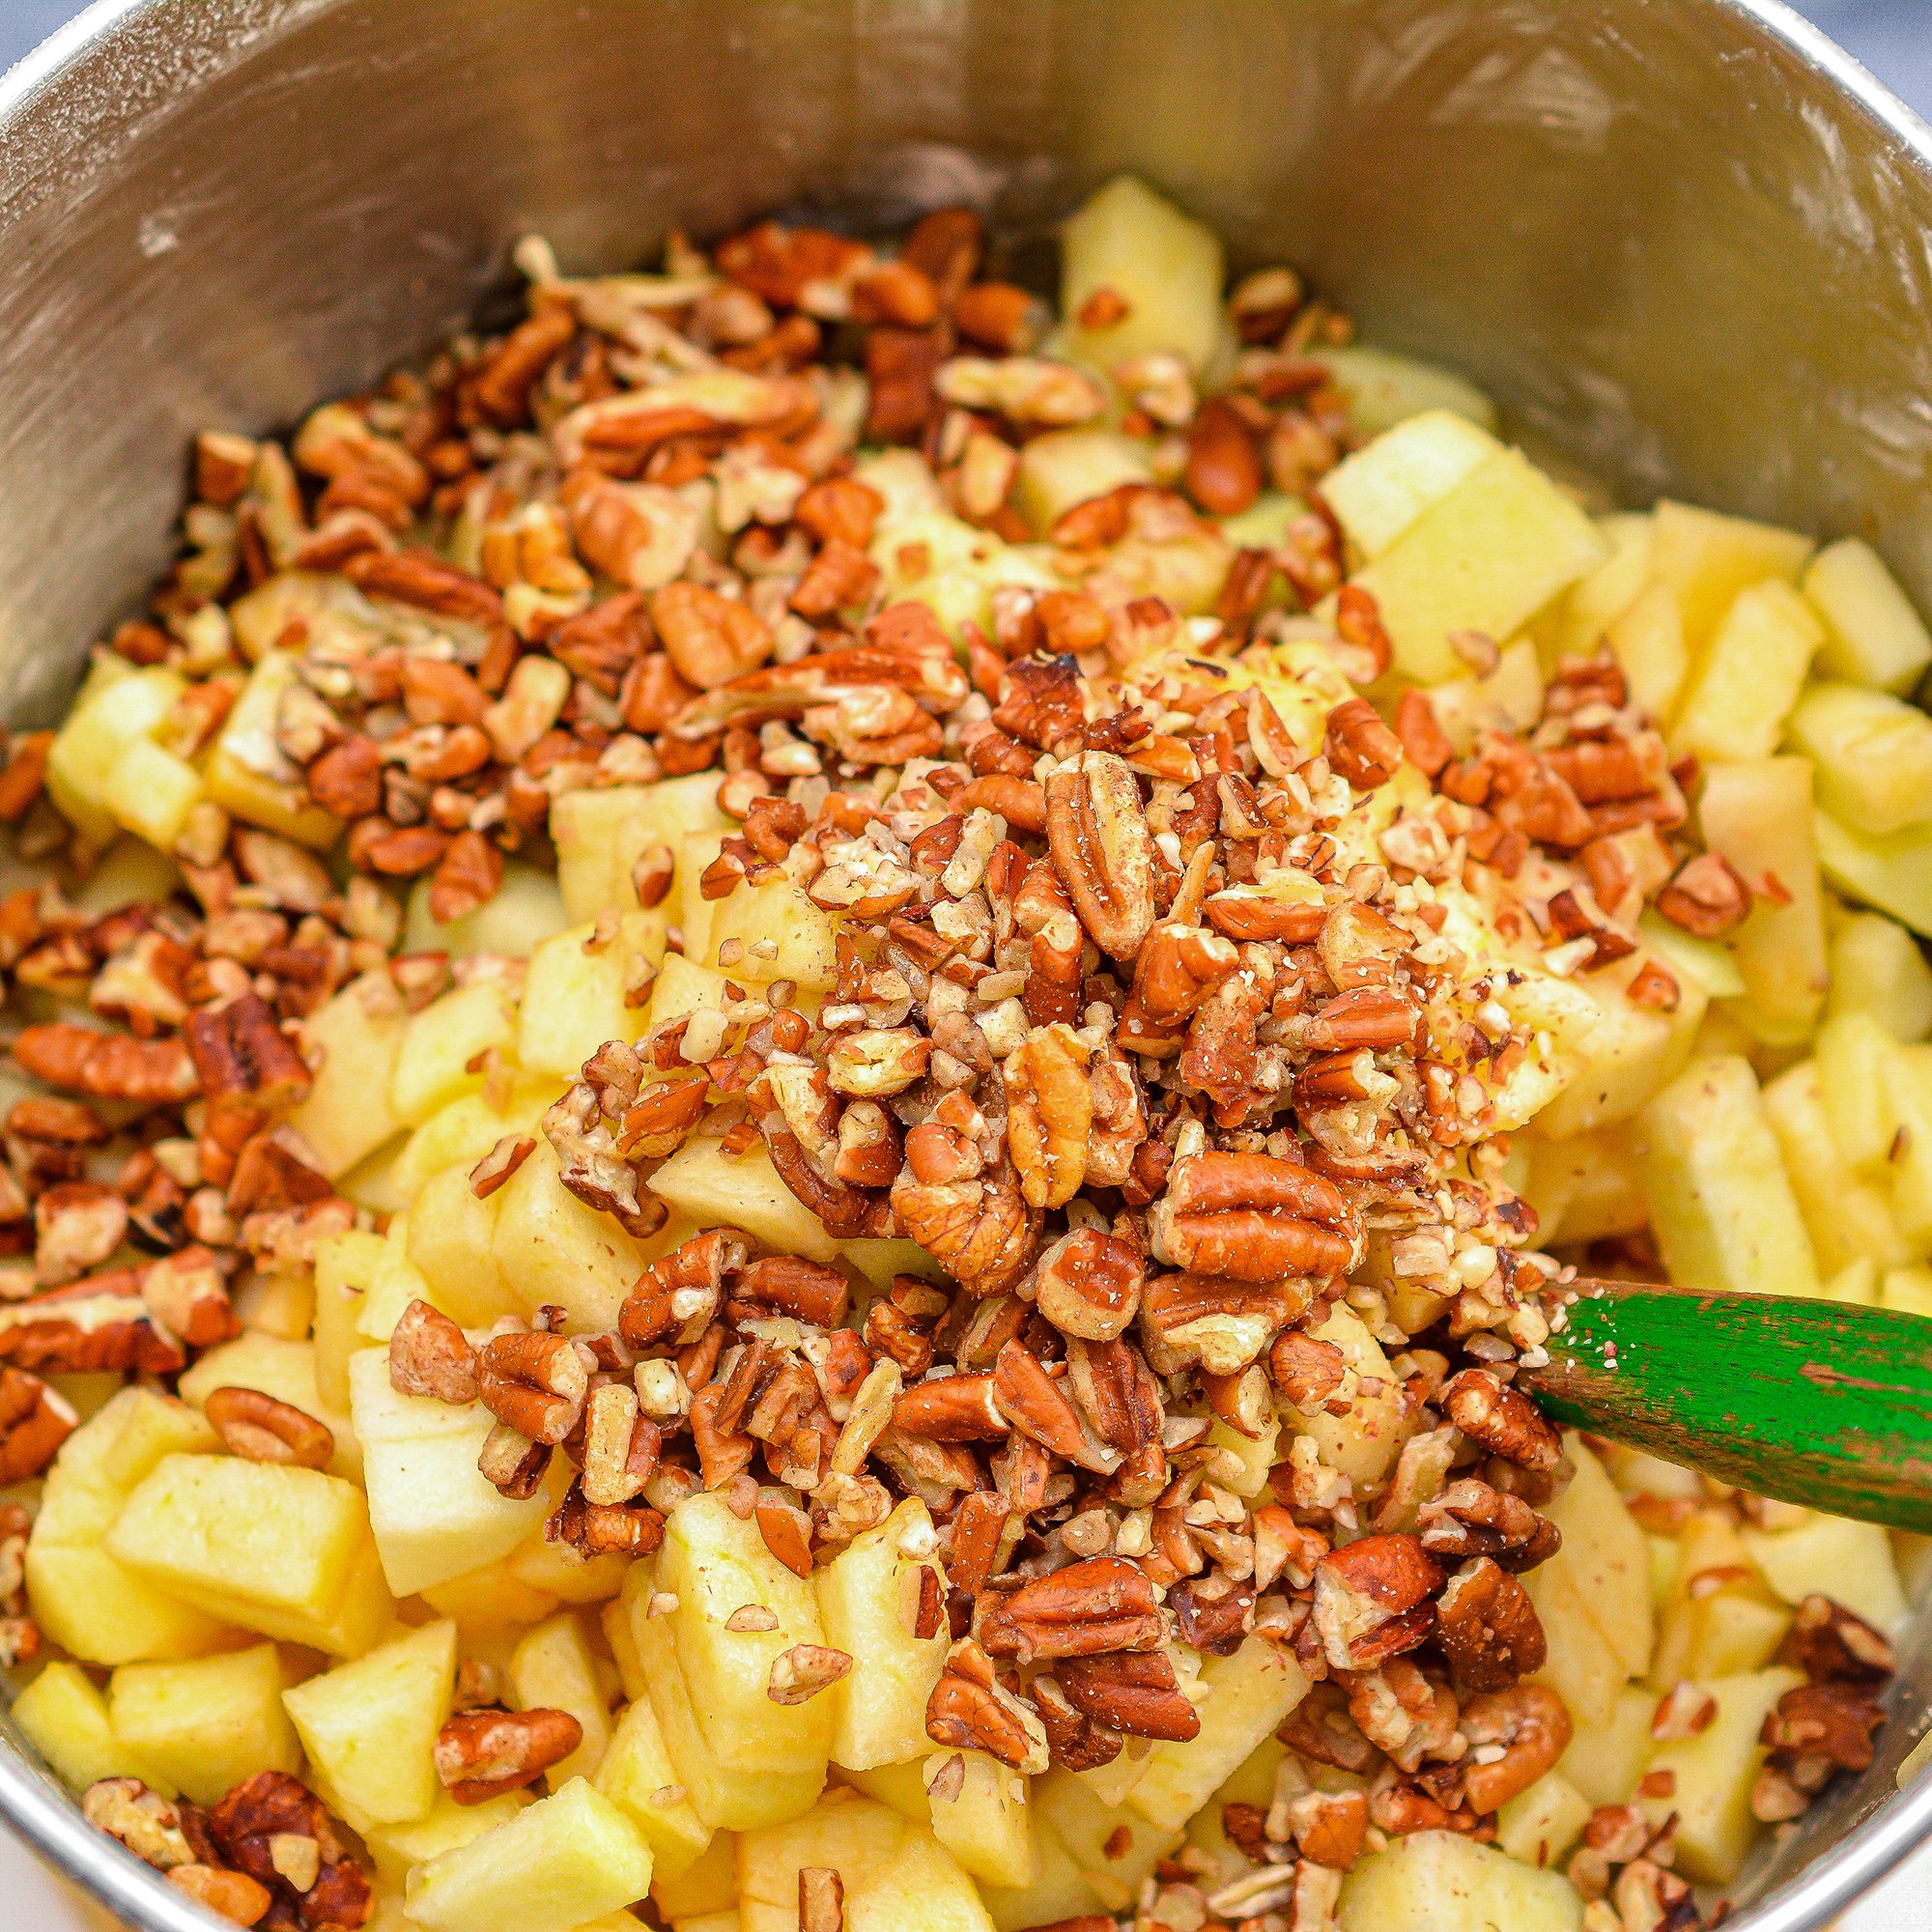 Fold the apples and pecans into the batter, and place into a well-greased bundt pan.